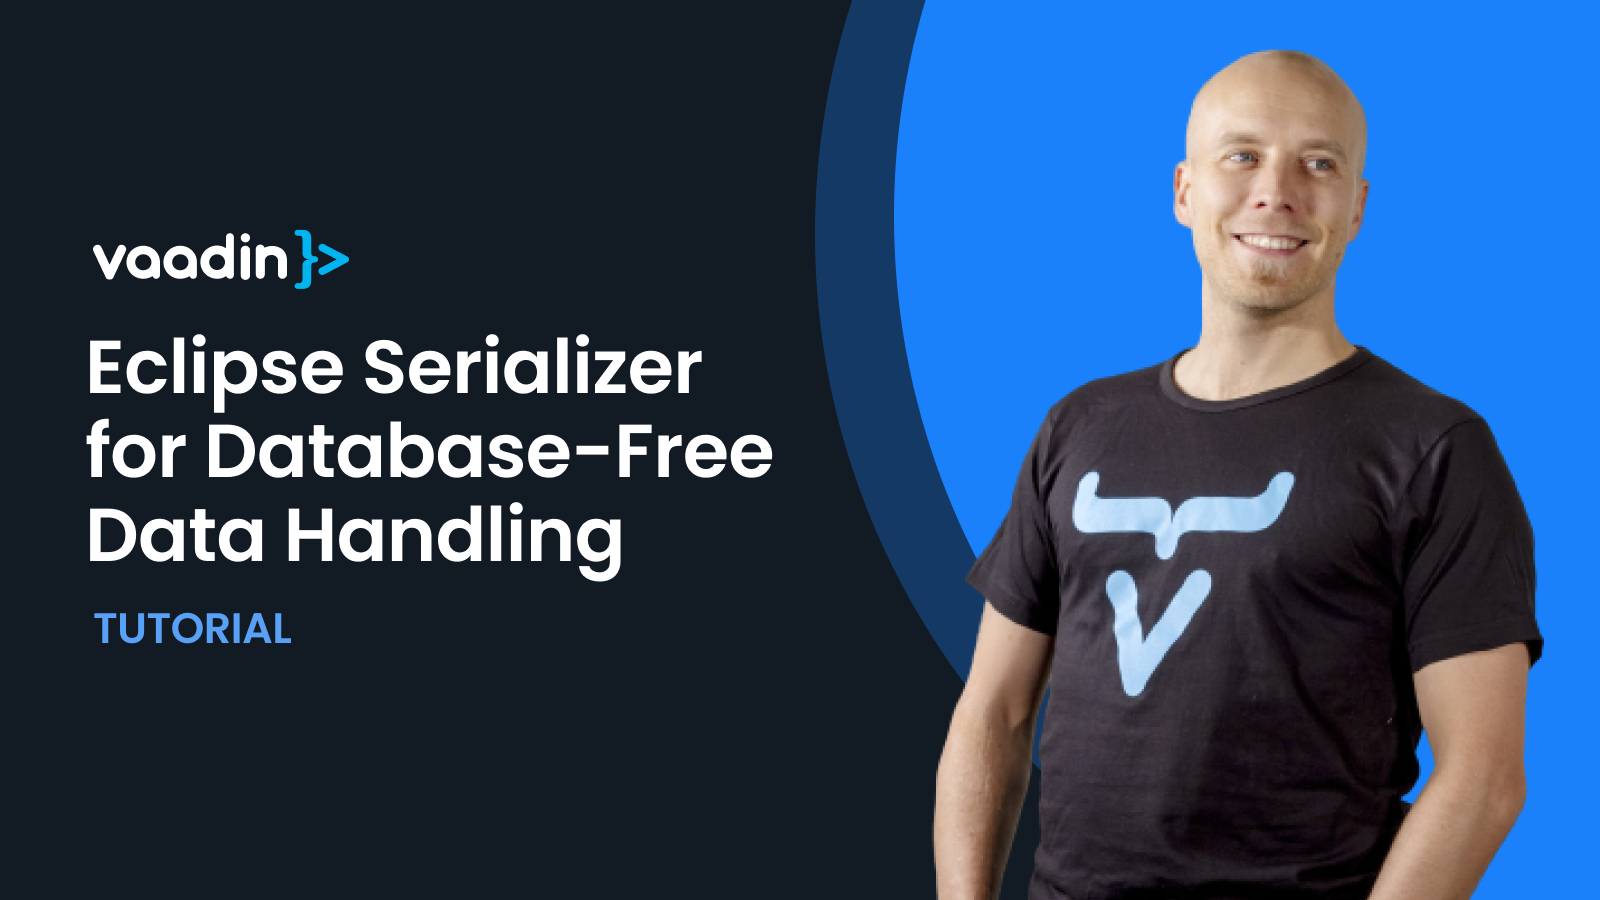 Explore a database-free approach with Eclipse Serializer for efficient data handling in this blog.